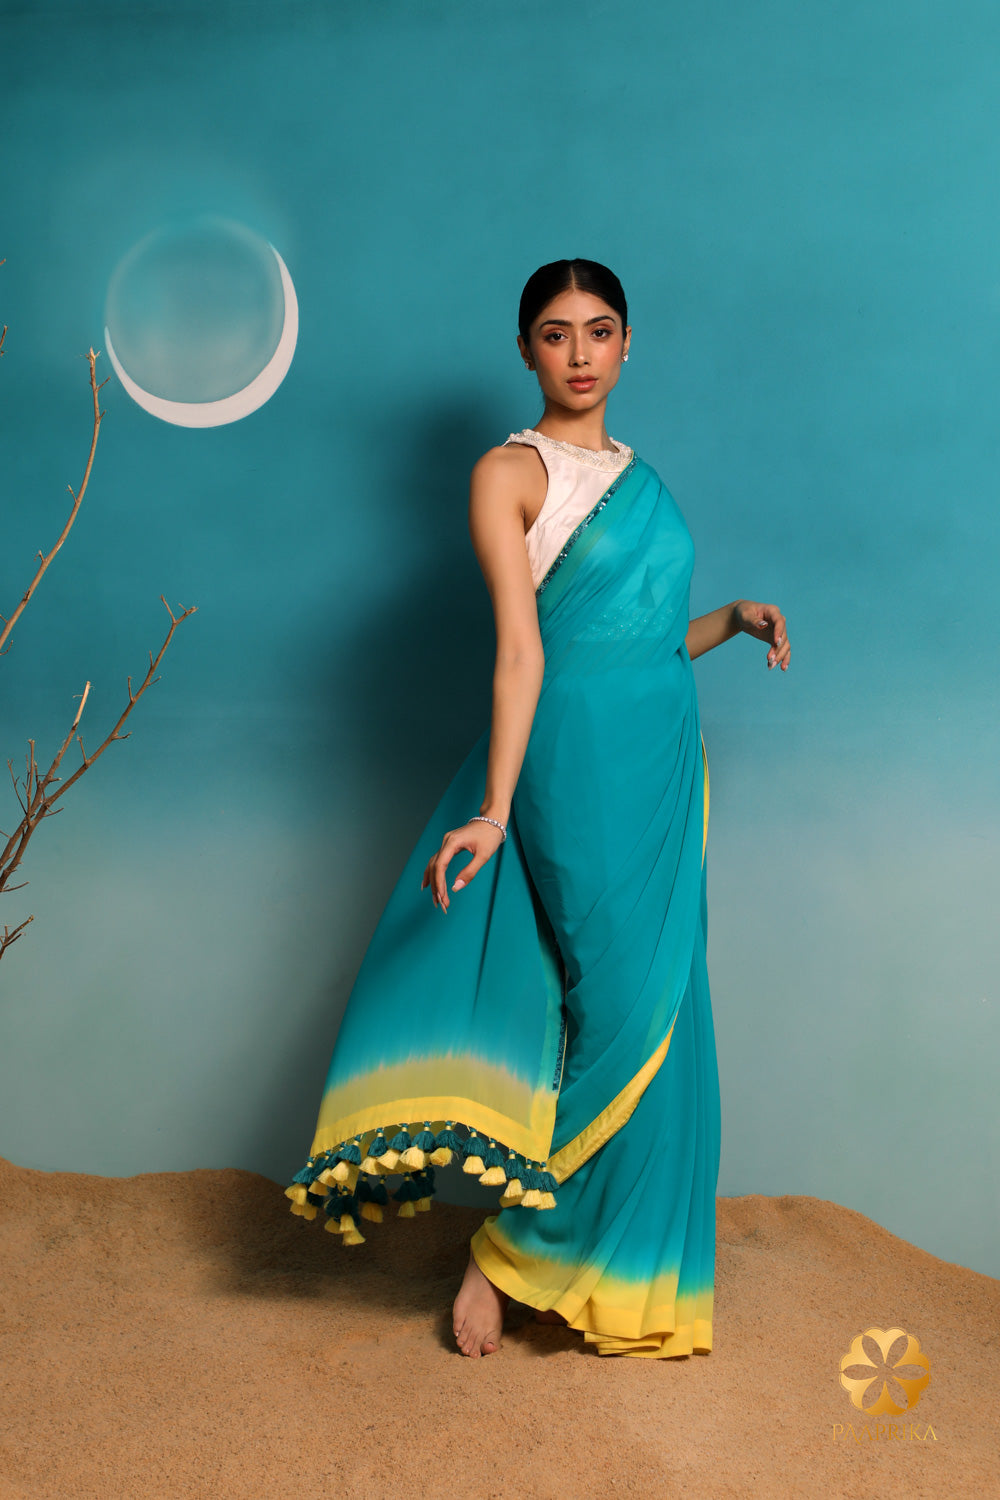 Exquisite Teal Georgette Saree with Pastel Yellow Ombre Border and Hand-Embroidered Sequins, Adorned with Teal and Yellow Tassels